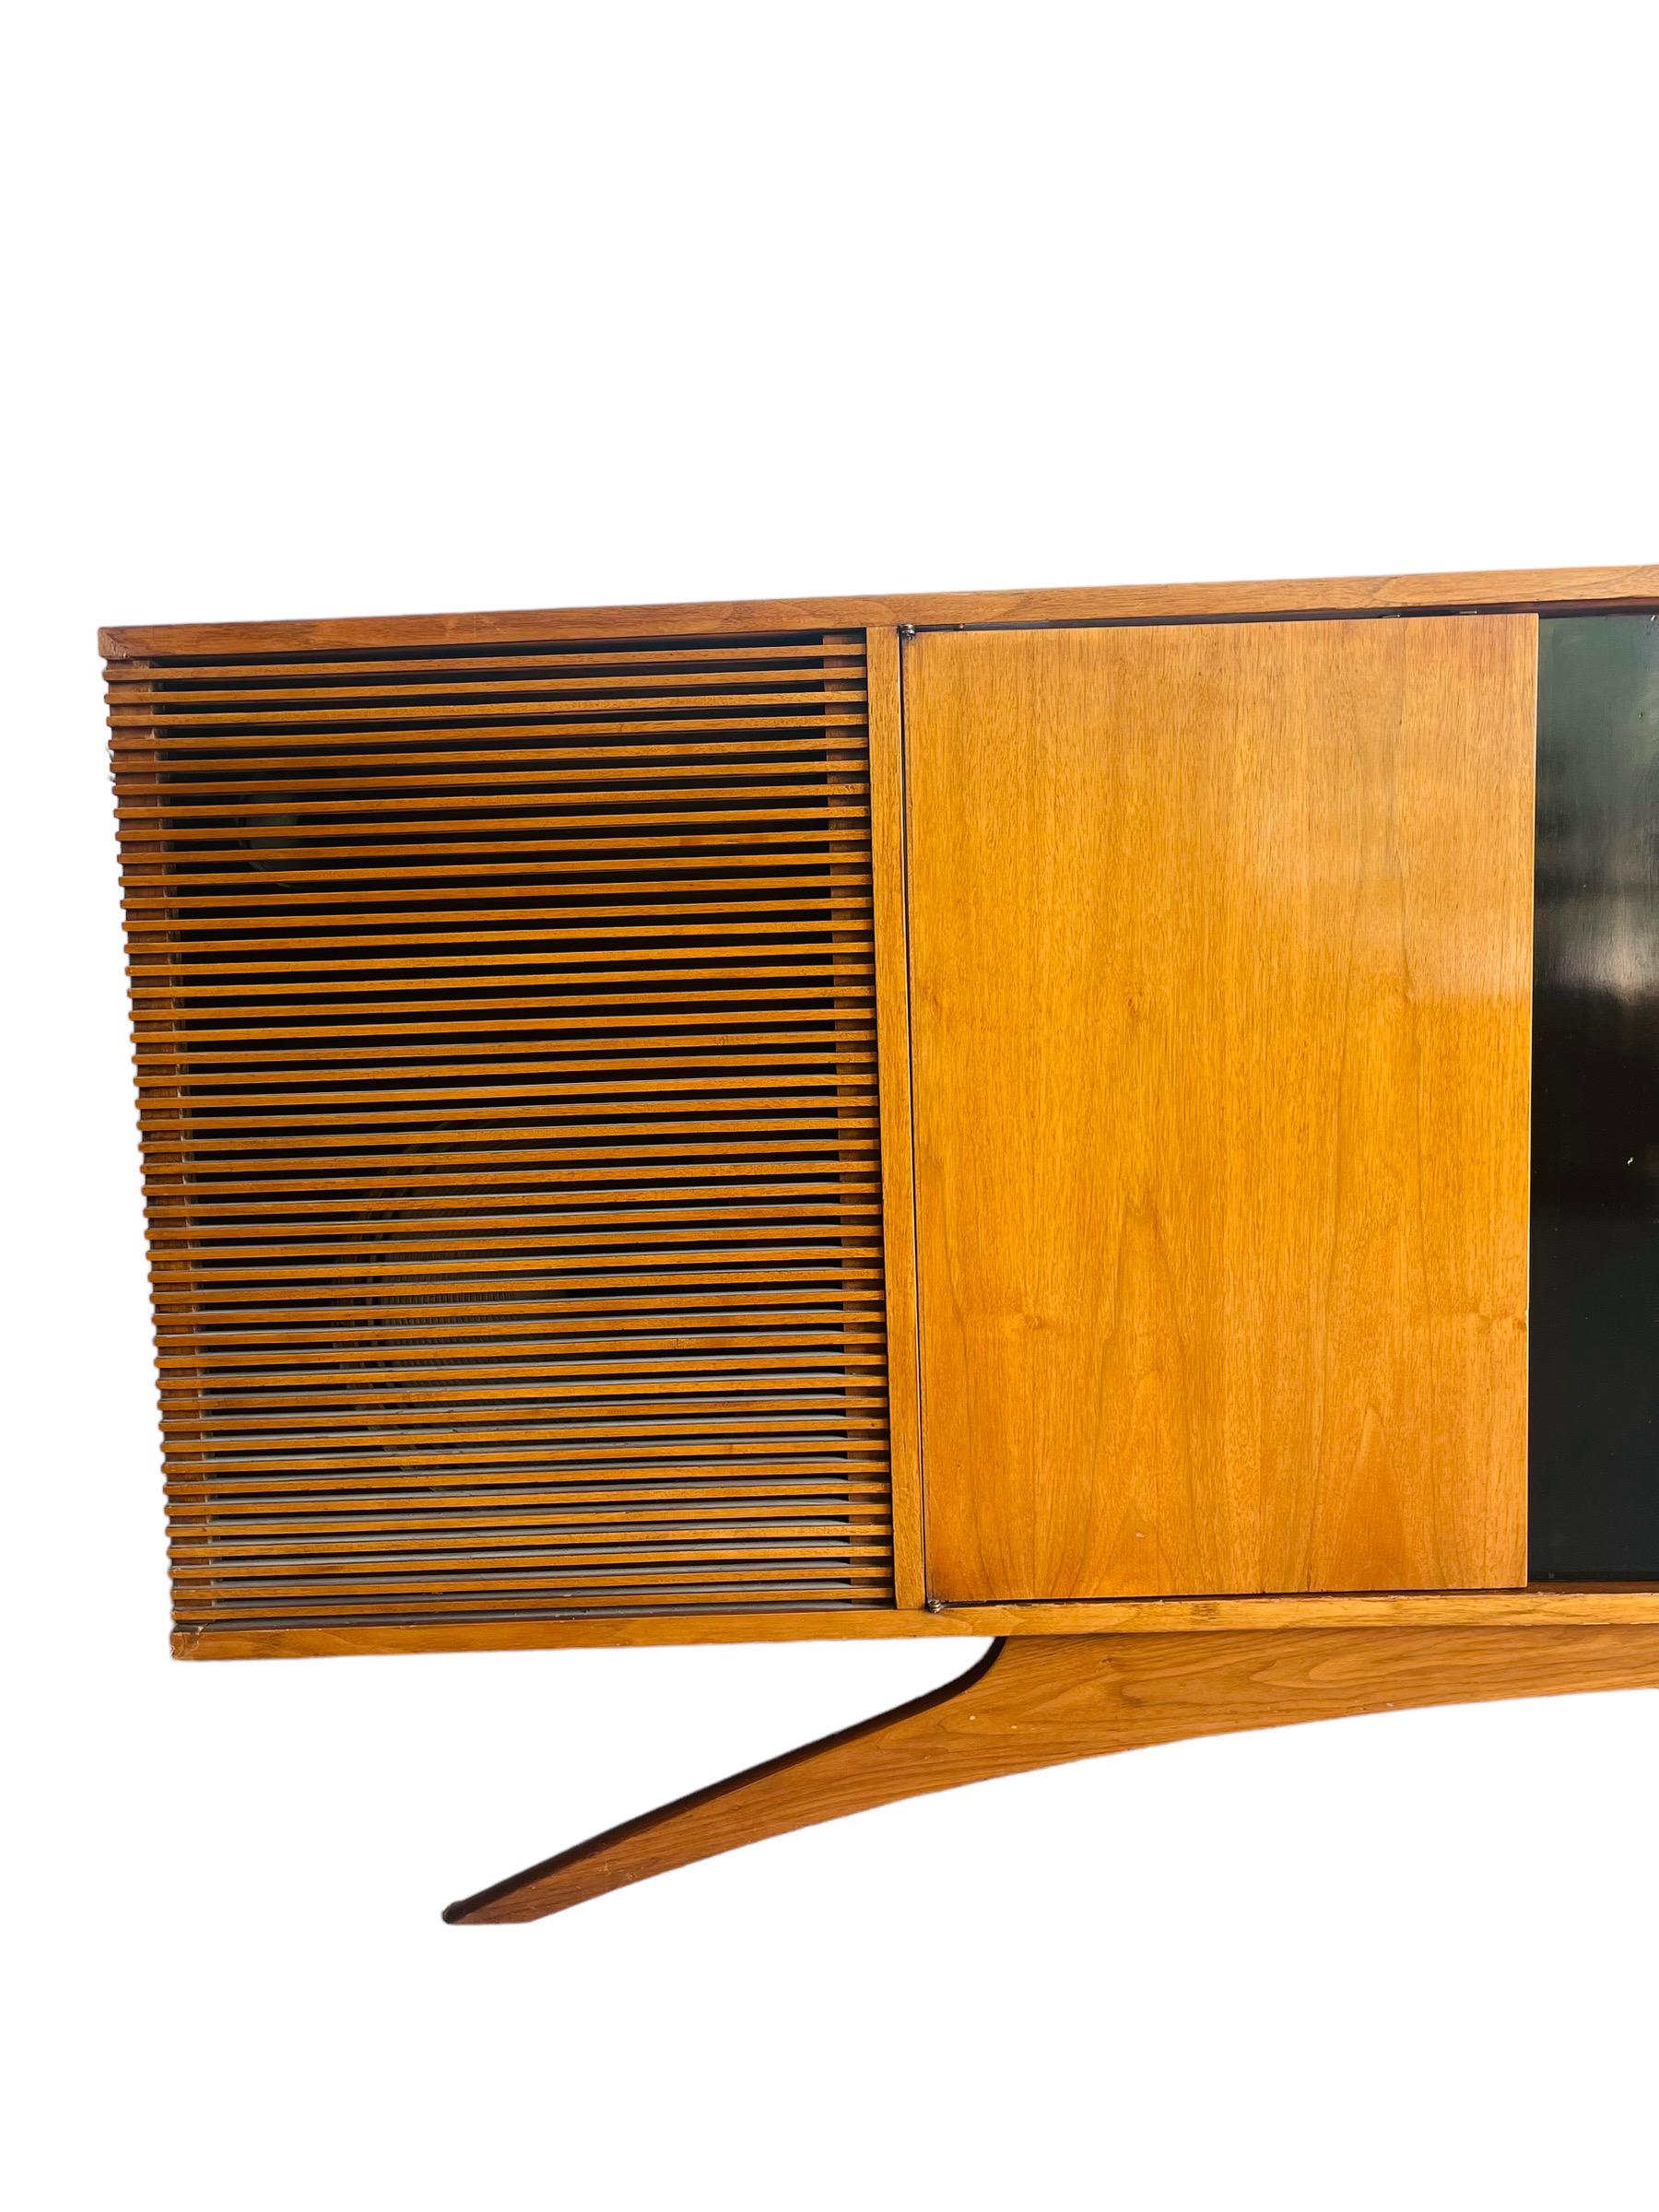 American Rare Sculptural Credenza / Stereo Cabinet in Walnut in Manner of Vladimir Kagan For Sale